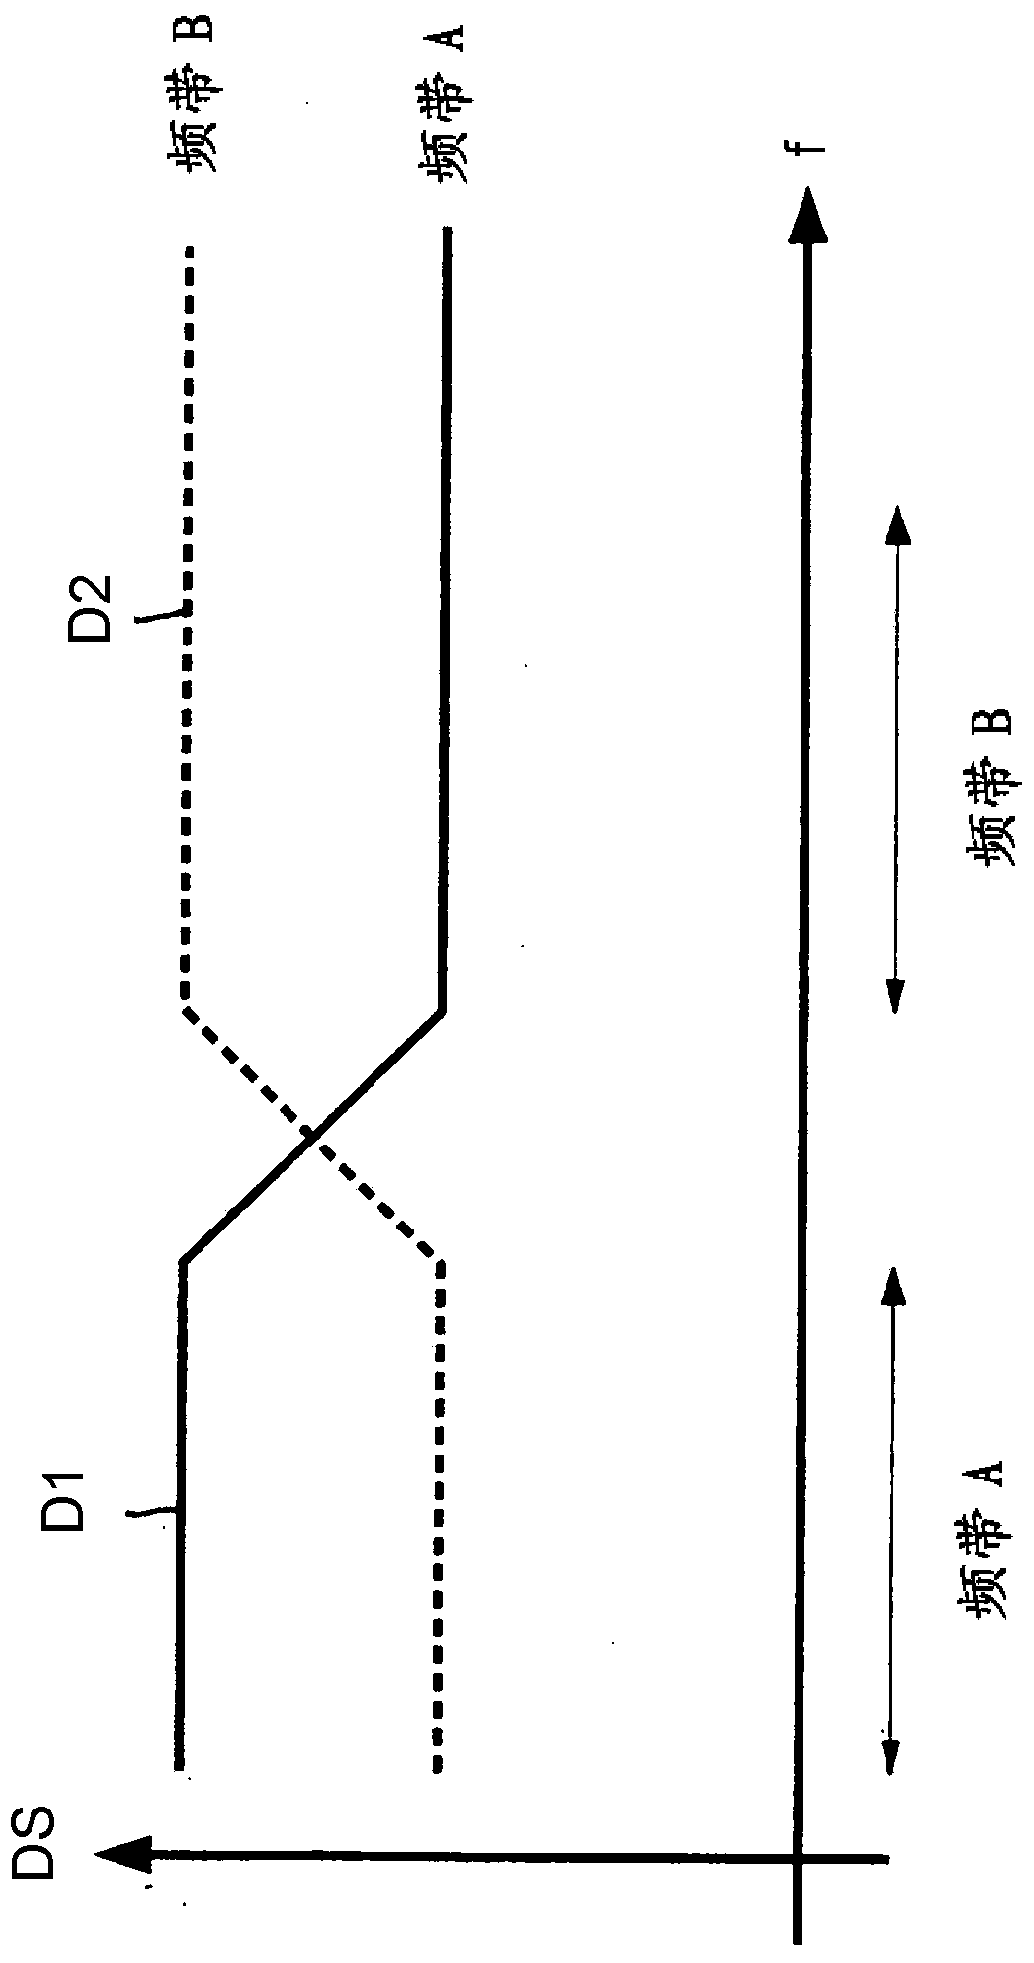 Antennas for dual-band or multi-band operation